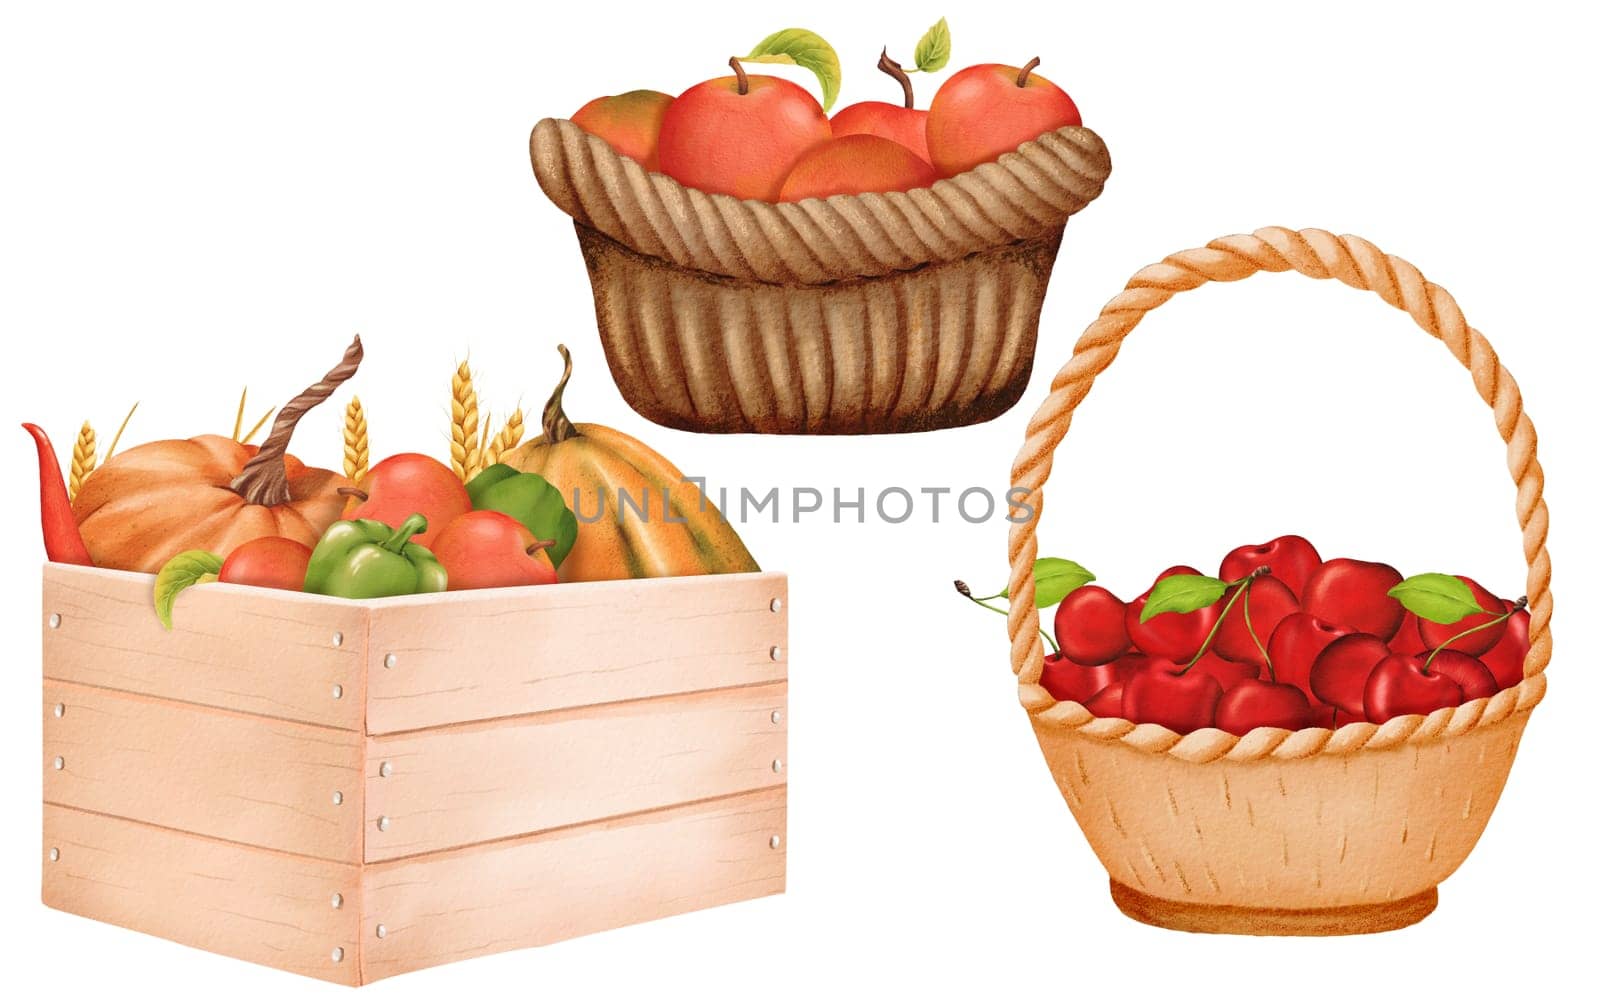 bountiful set. Vegetables in a wooden crate: pumpkins, paprika, chili peppers, and wheat sheaves. Crunchy red apples in a woven basket. Juicy, ripe, vibrant cherries. Watercolor digital illustration.